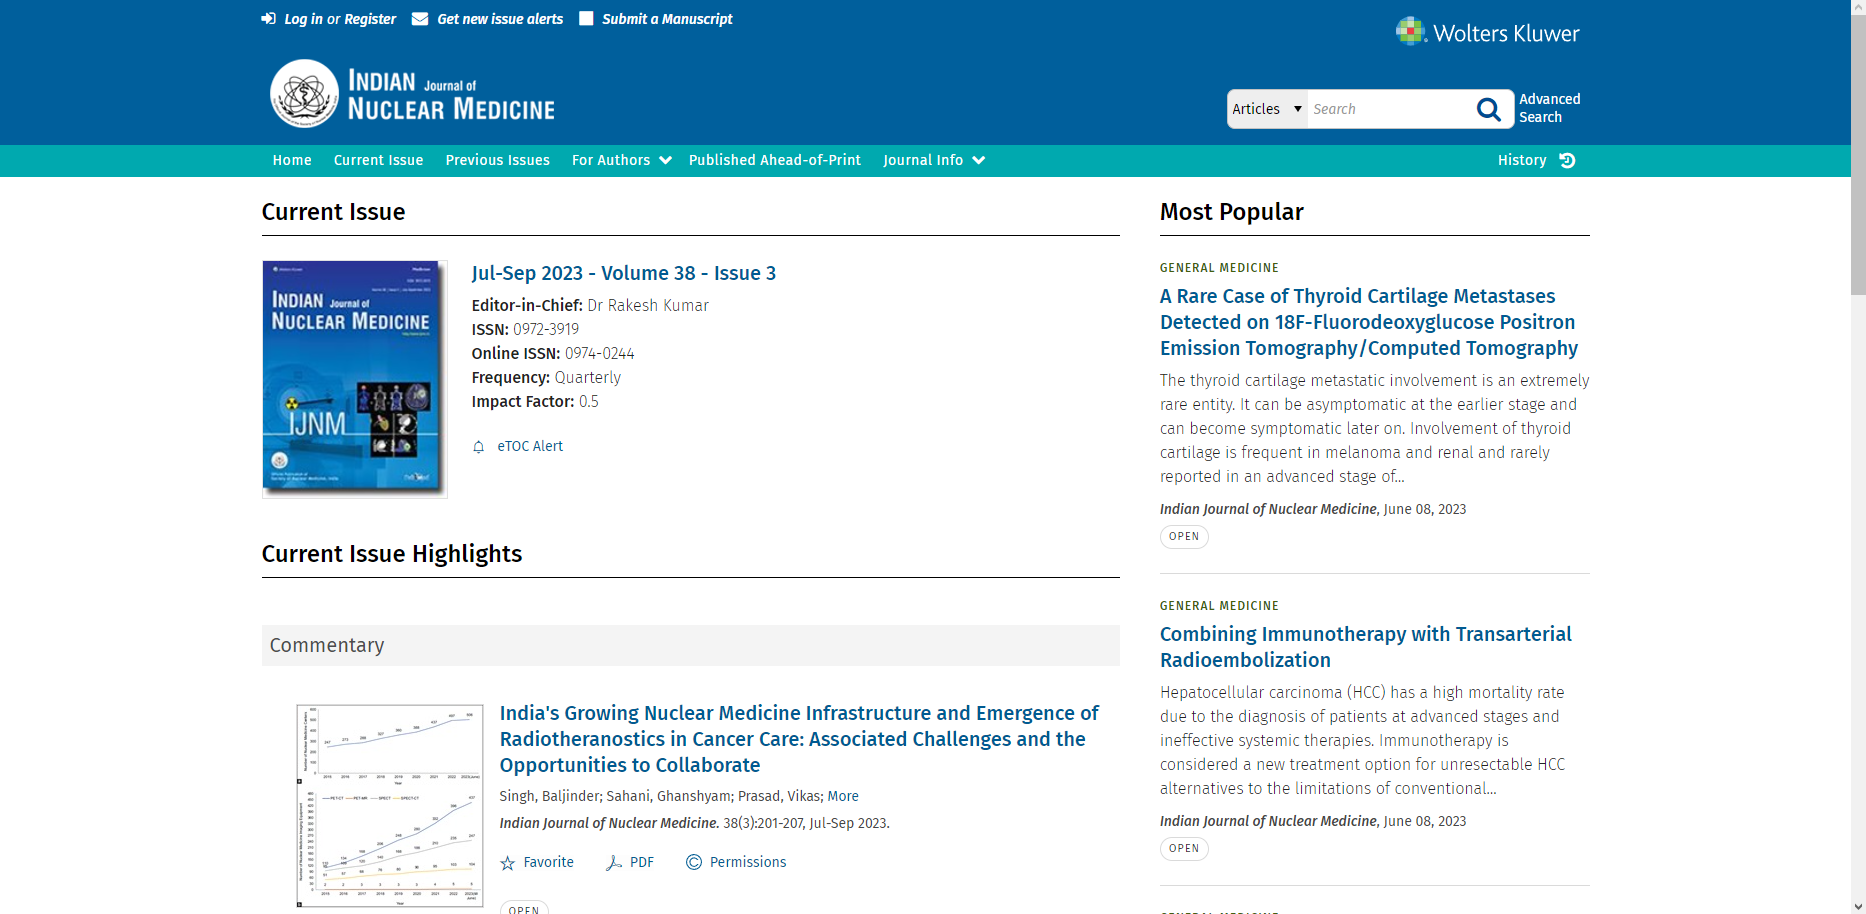 Indian Journal of Nuclear Medicine